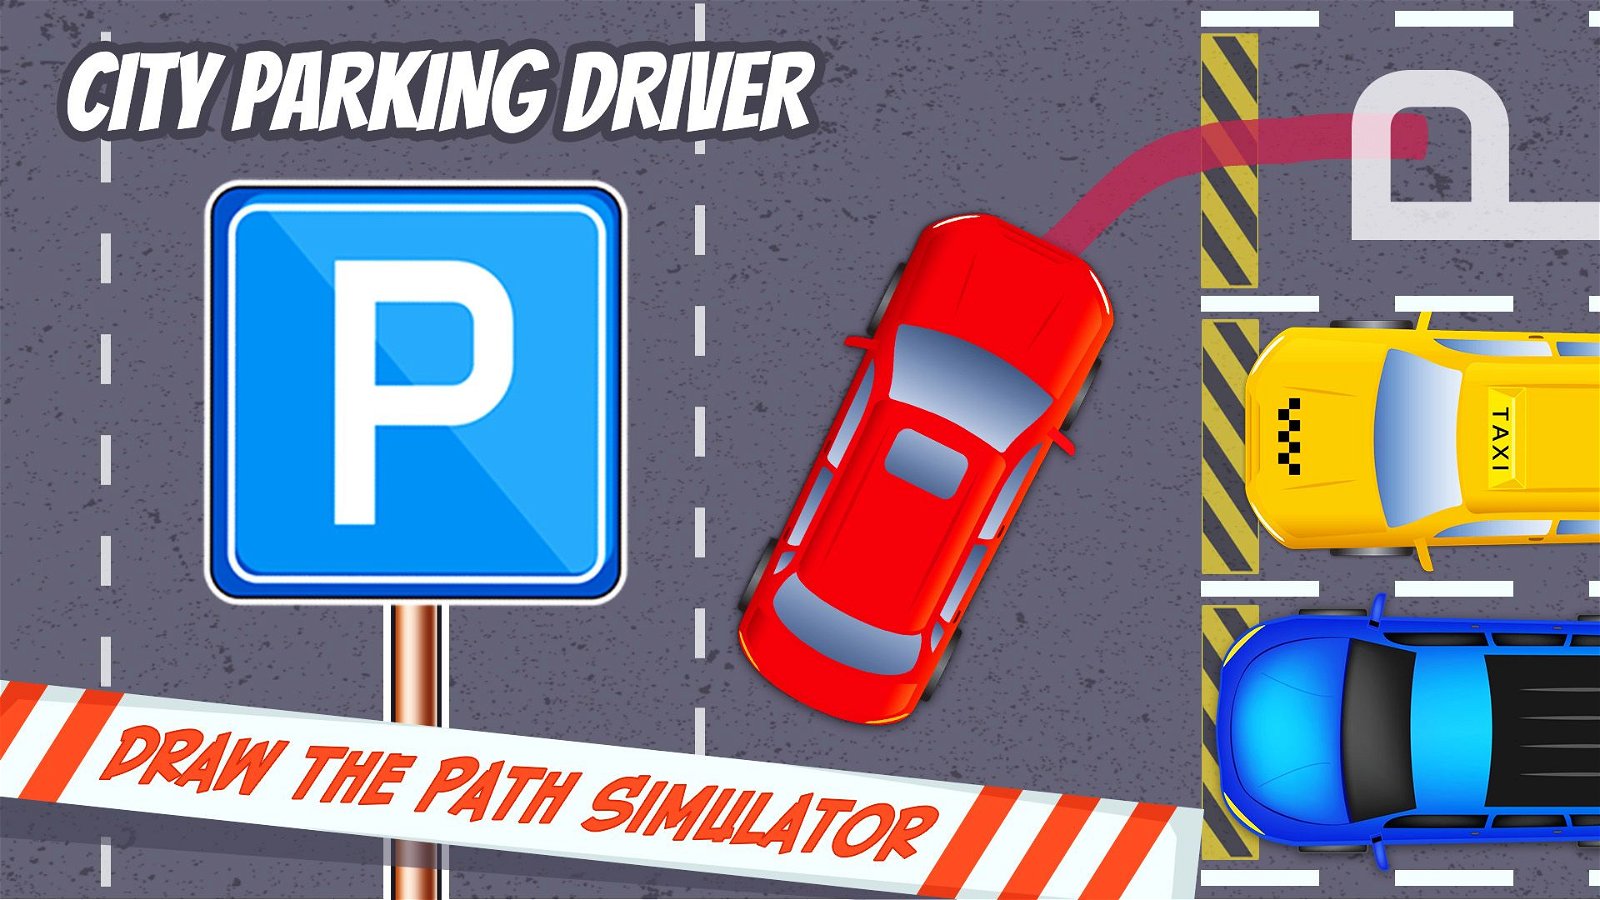 Image of City Parking Driver: Draw The Path Simulator